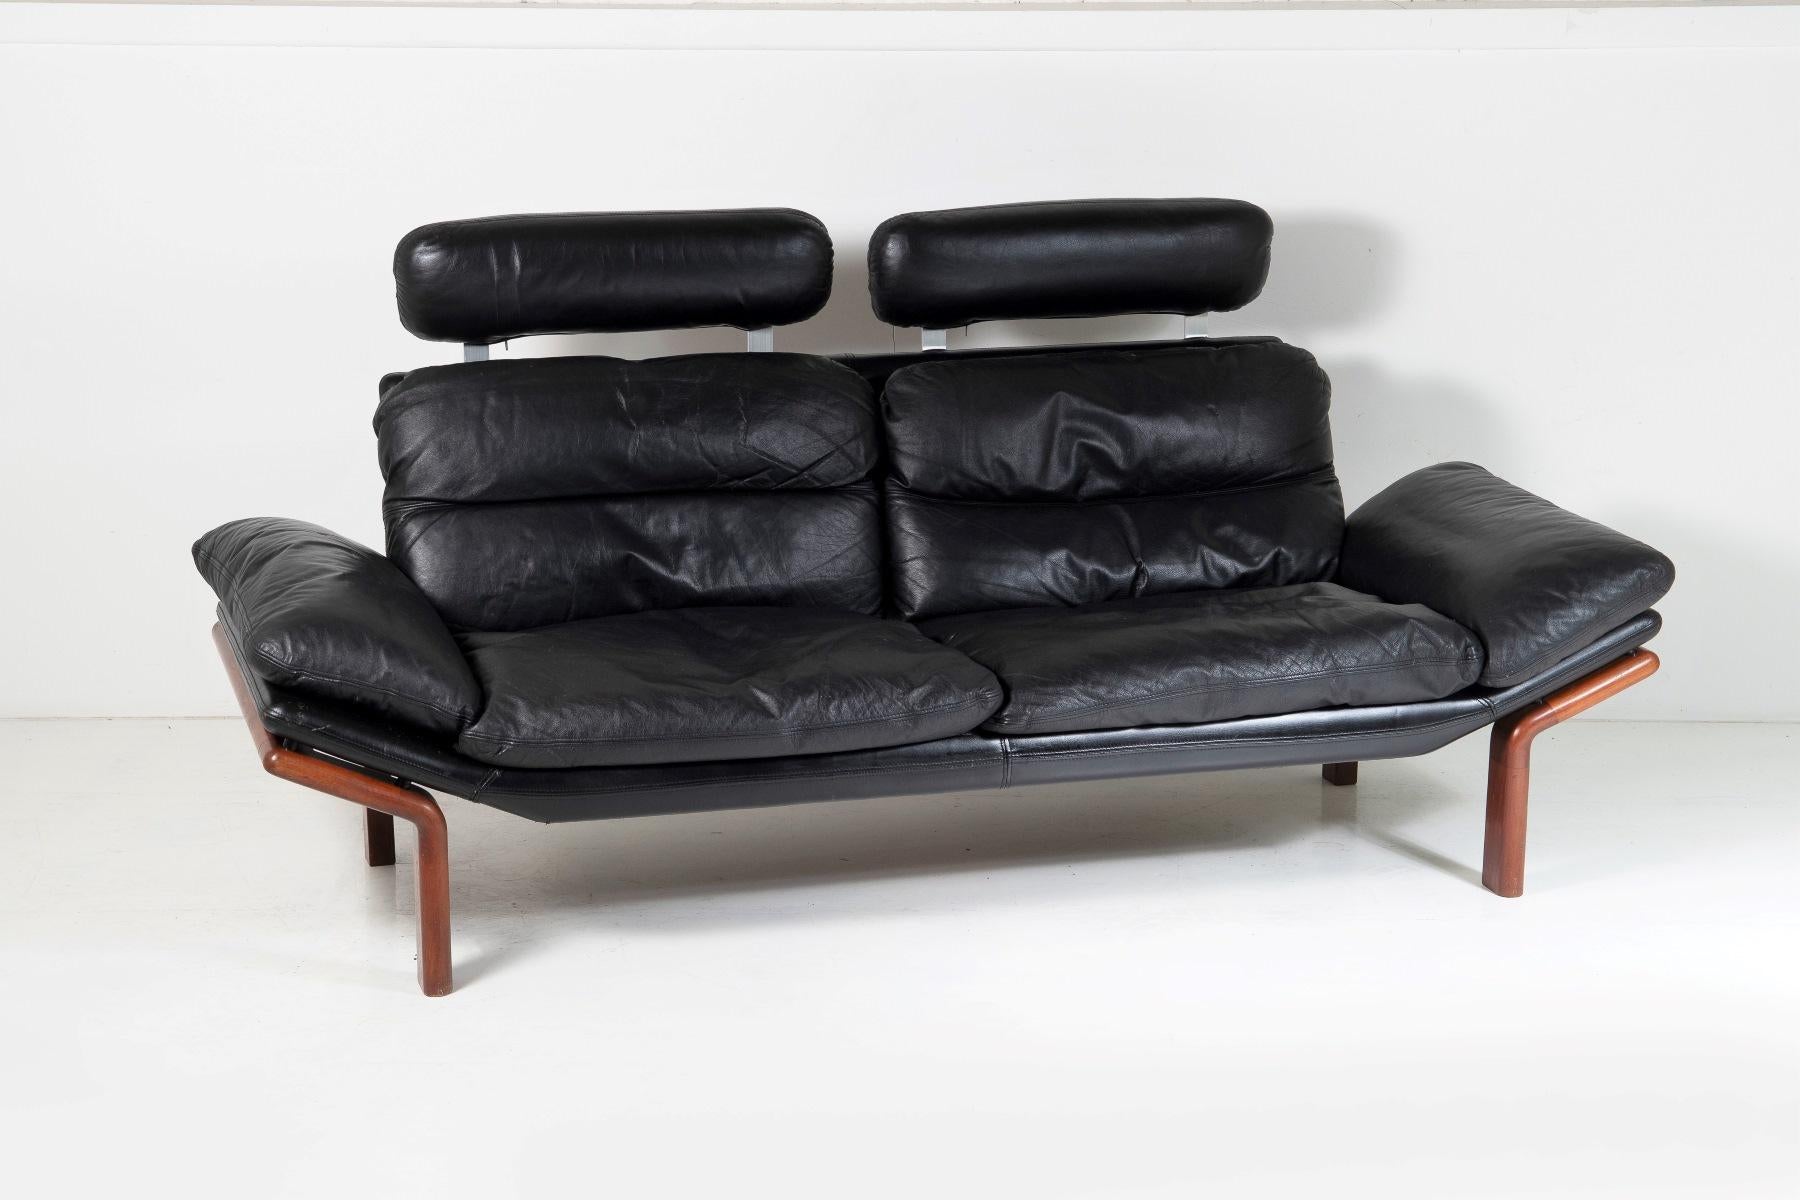 1960-70s Mid-Century Modern Danish Black Leather and Teak Sofa by Komfort In Good Condition For Sale In Llanbrynmair, GB